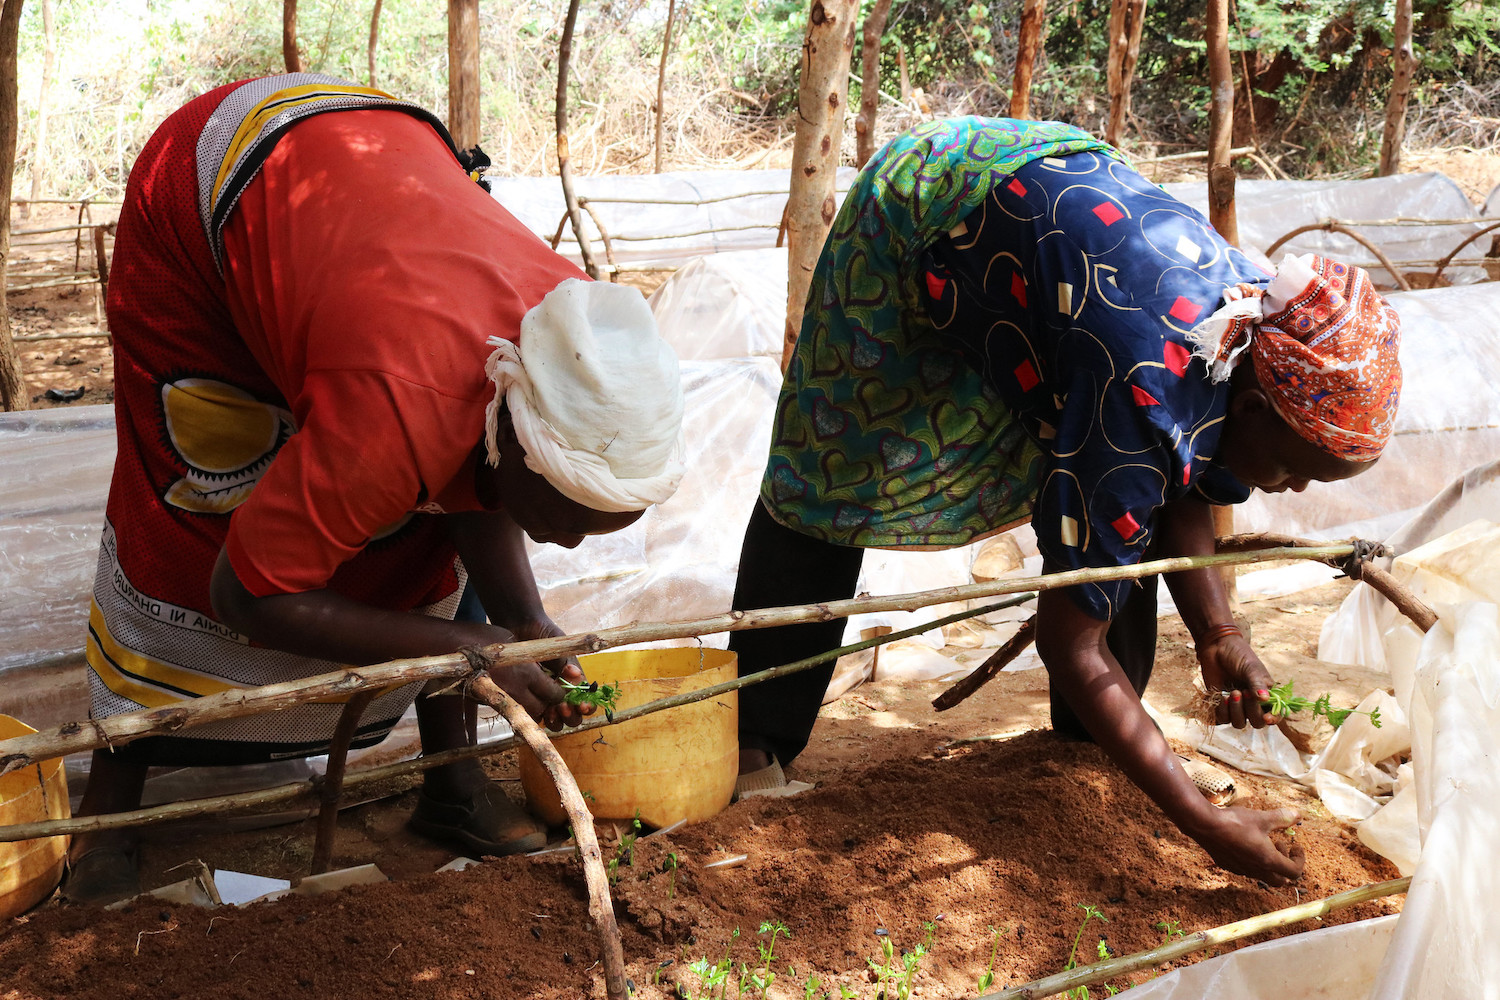 Harvesting seedlings in Kenya - Mastercard priceless projects to restore the planet